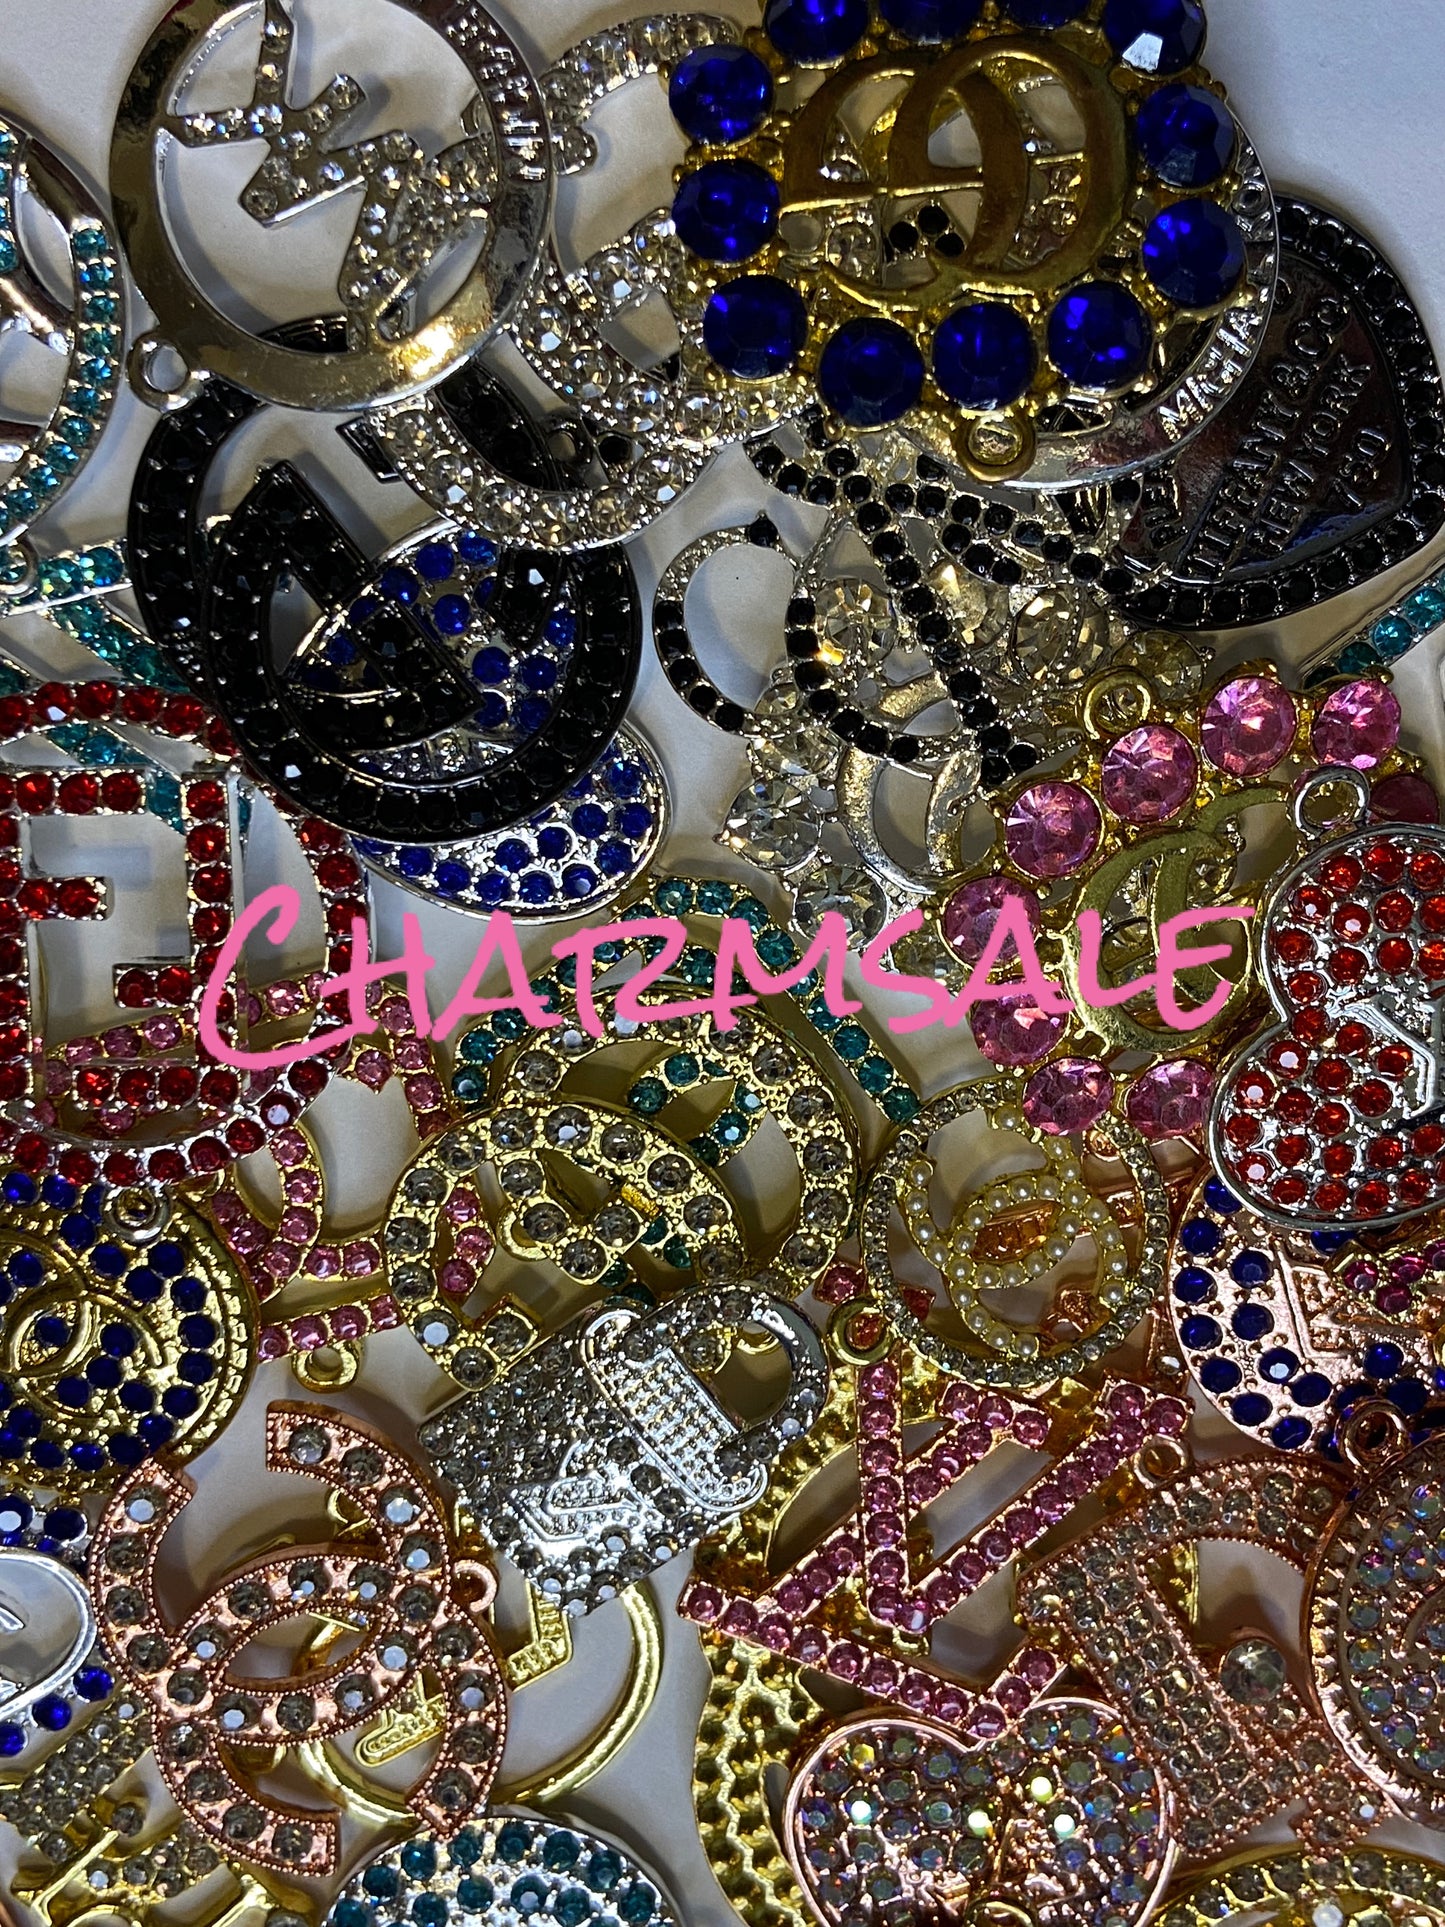 Inspired designer Charms wholesale